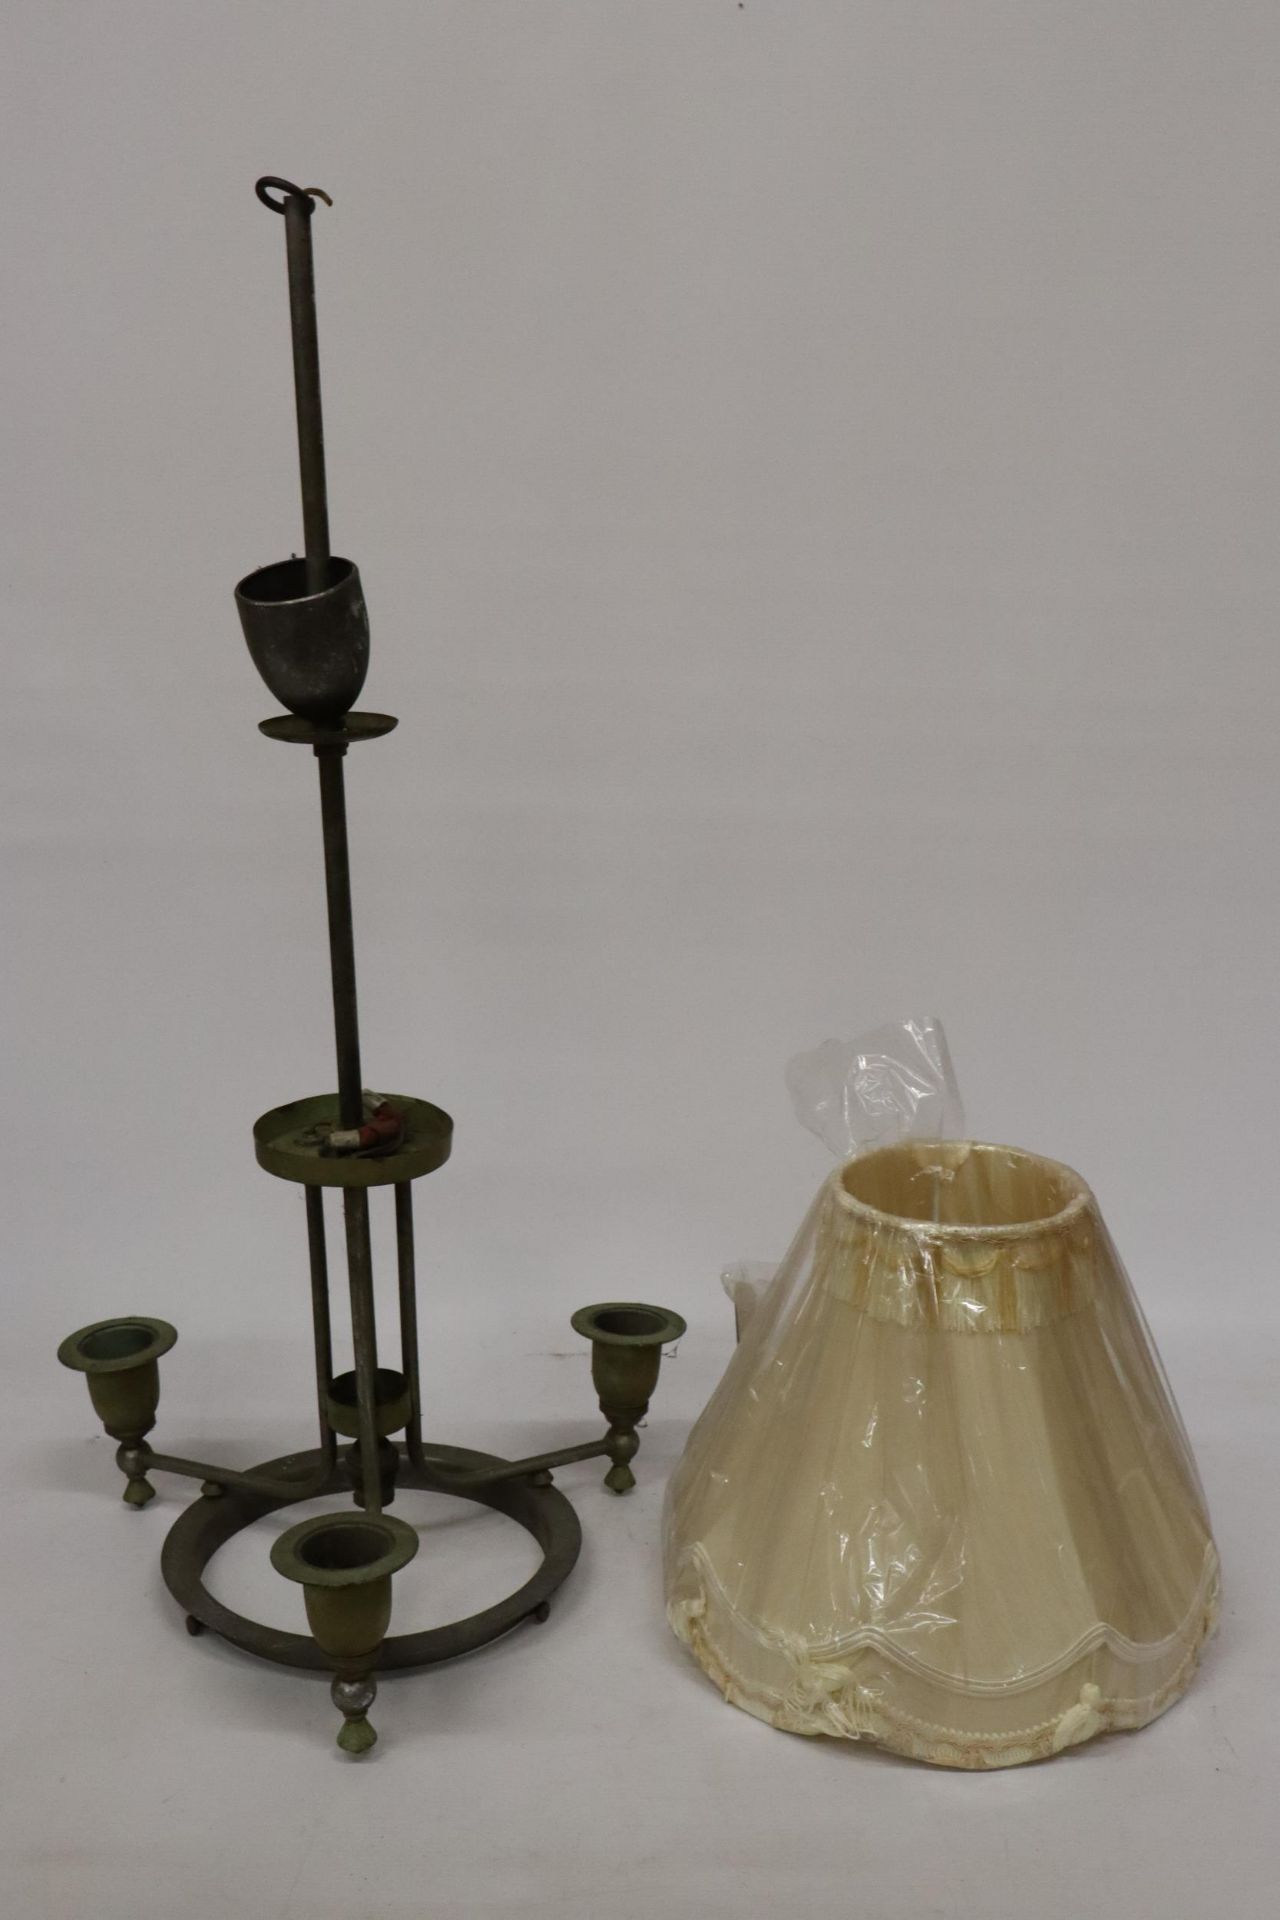 A VINTAGE BRASS CEILING LIGHT WITH THREE BRANCHES PLUS TWO SHADES - Image 5 of 6